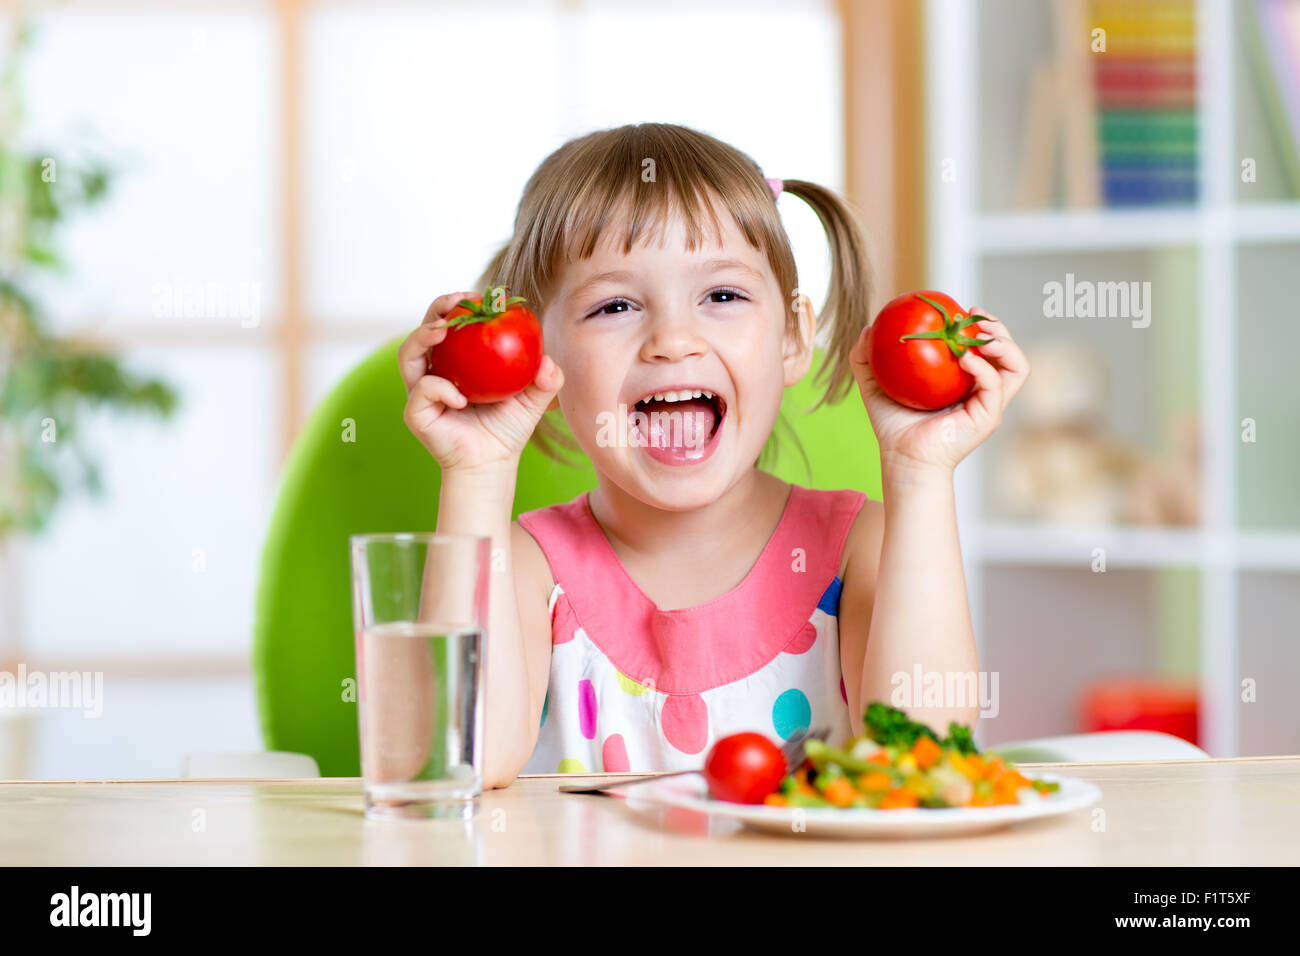 Portrait of happy child with vegetables Stock Photo